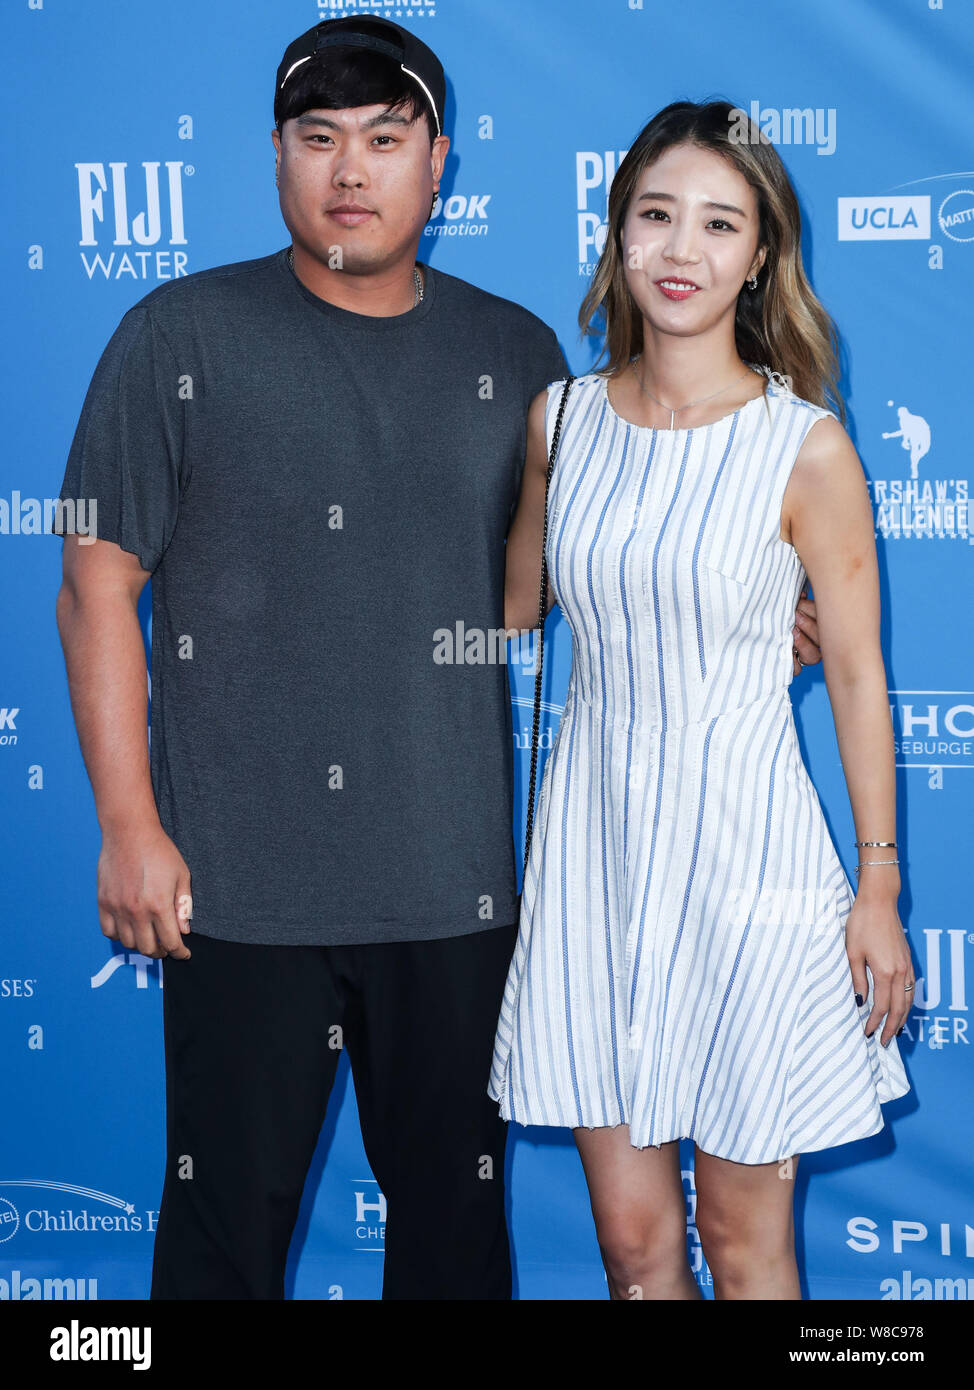 Special Event of LA Dodgers Game Today - Ryu Hyun Jin's wife's